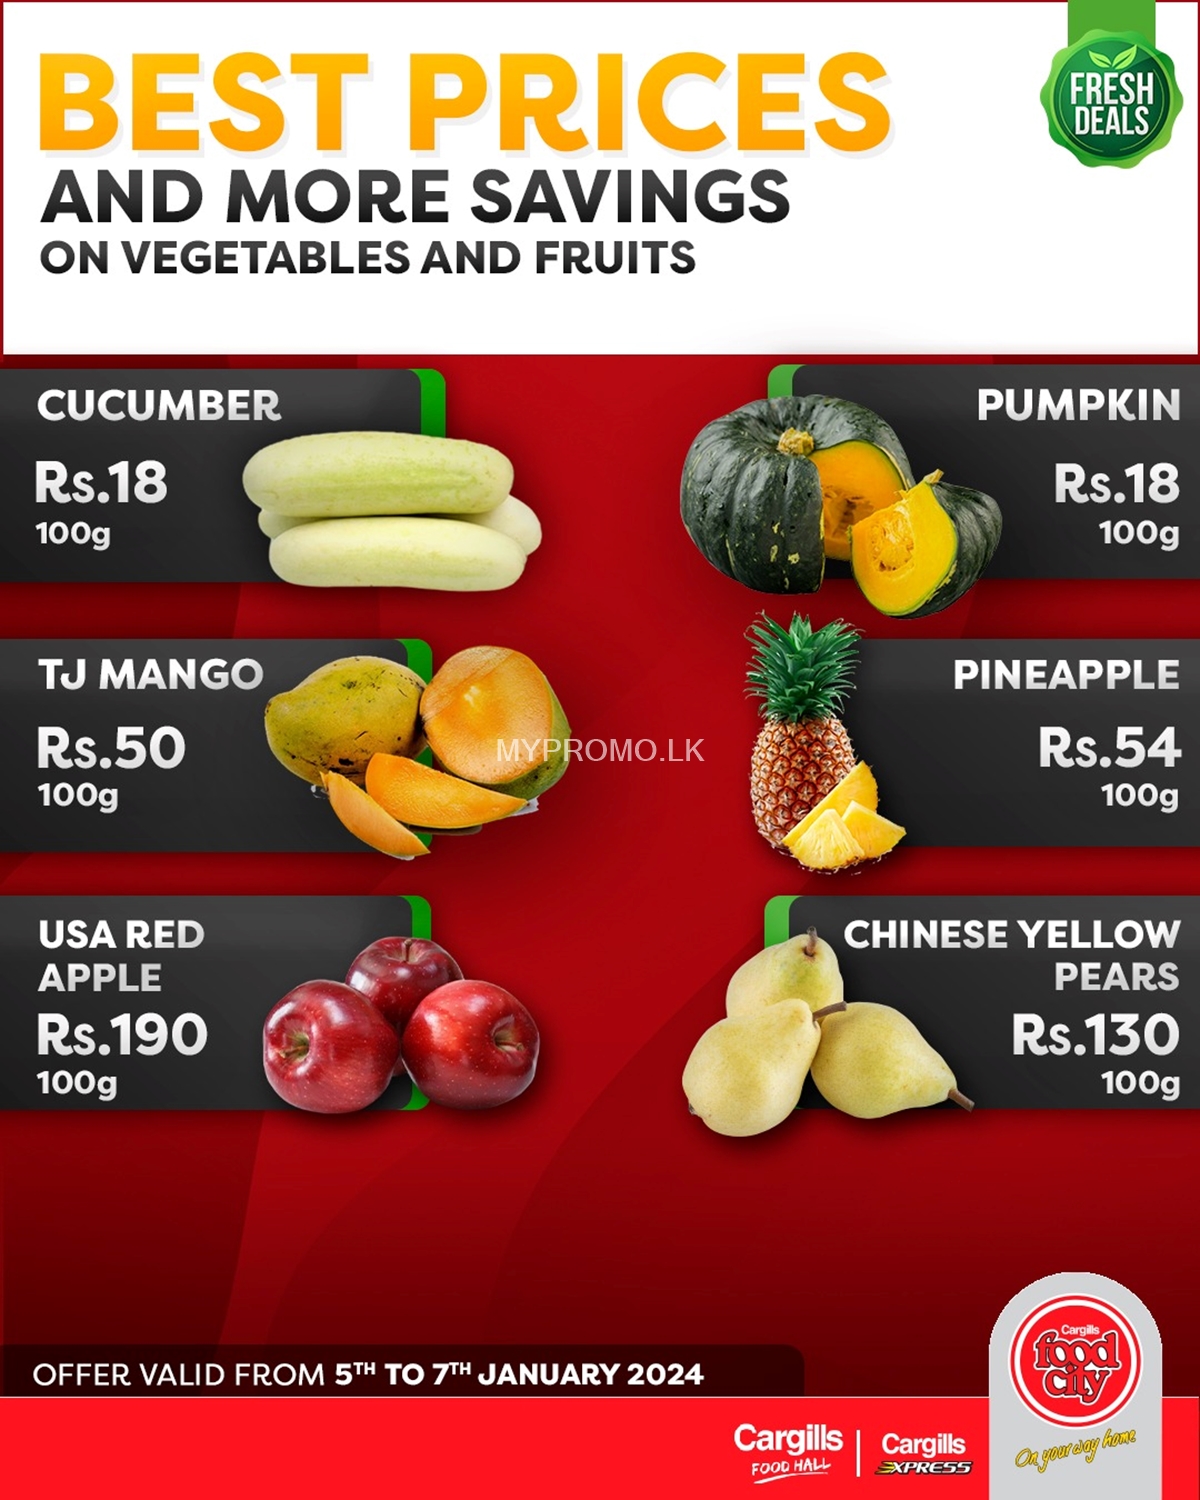 Buy Fresh Vegetables and Fruits at the Lowest Prices and More Savings Across Cargills FoodCity Outlets Island wide!